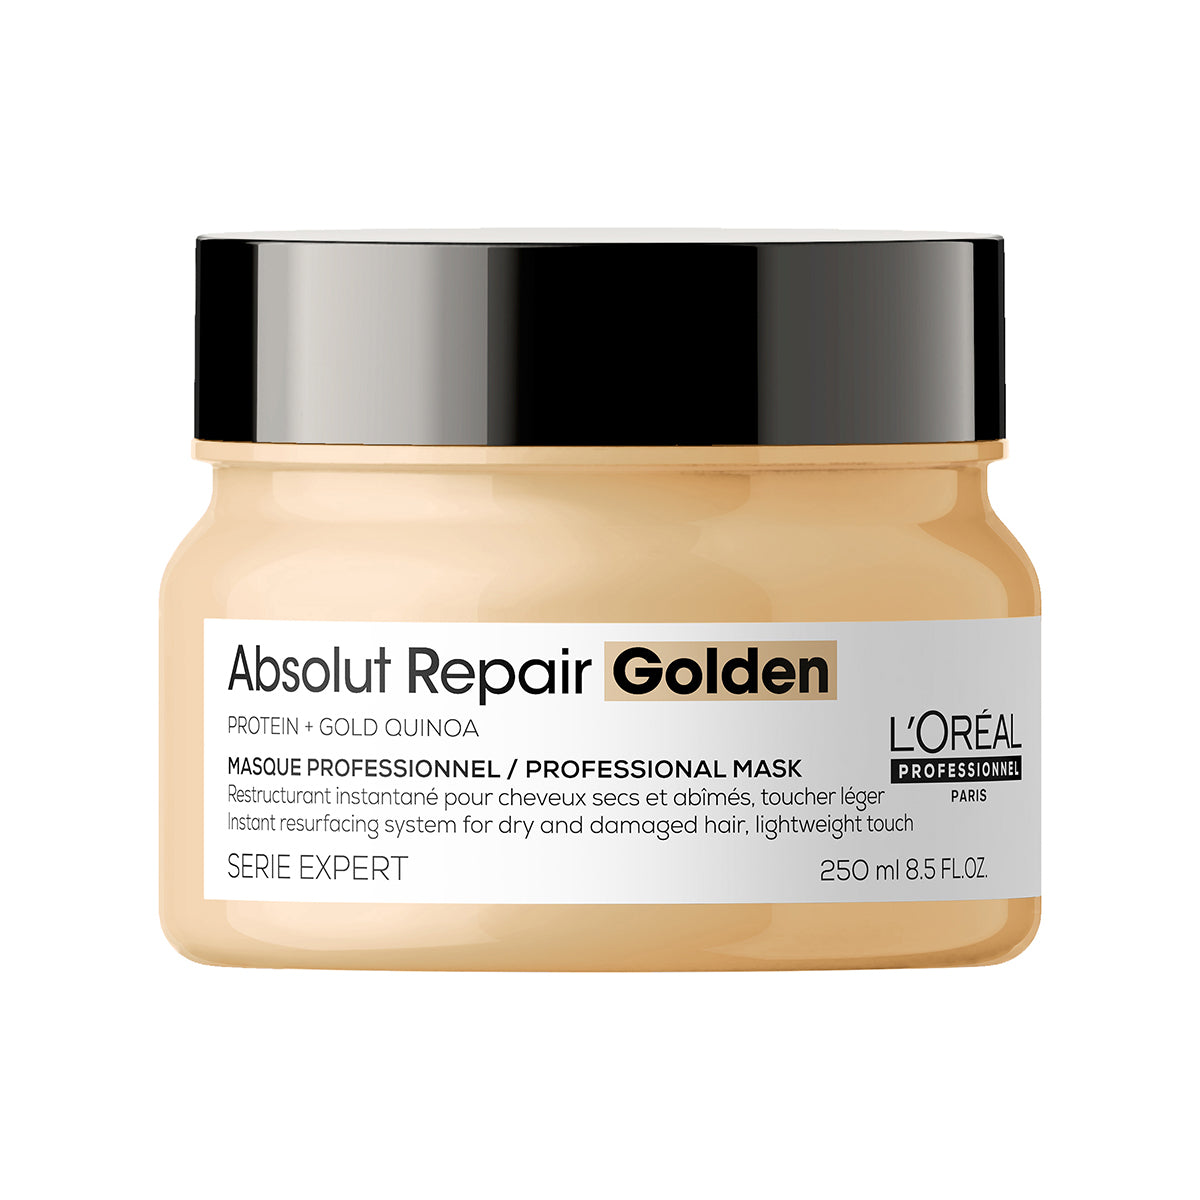 Shop The Latest Collection Of L'Oreal Professionnel Absolut Repair Golden Mask With Protein And Gold Quinoa For Dry And Damaged Hair, Lightweight Touch Serie Expert 250Ml In Lebanon